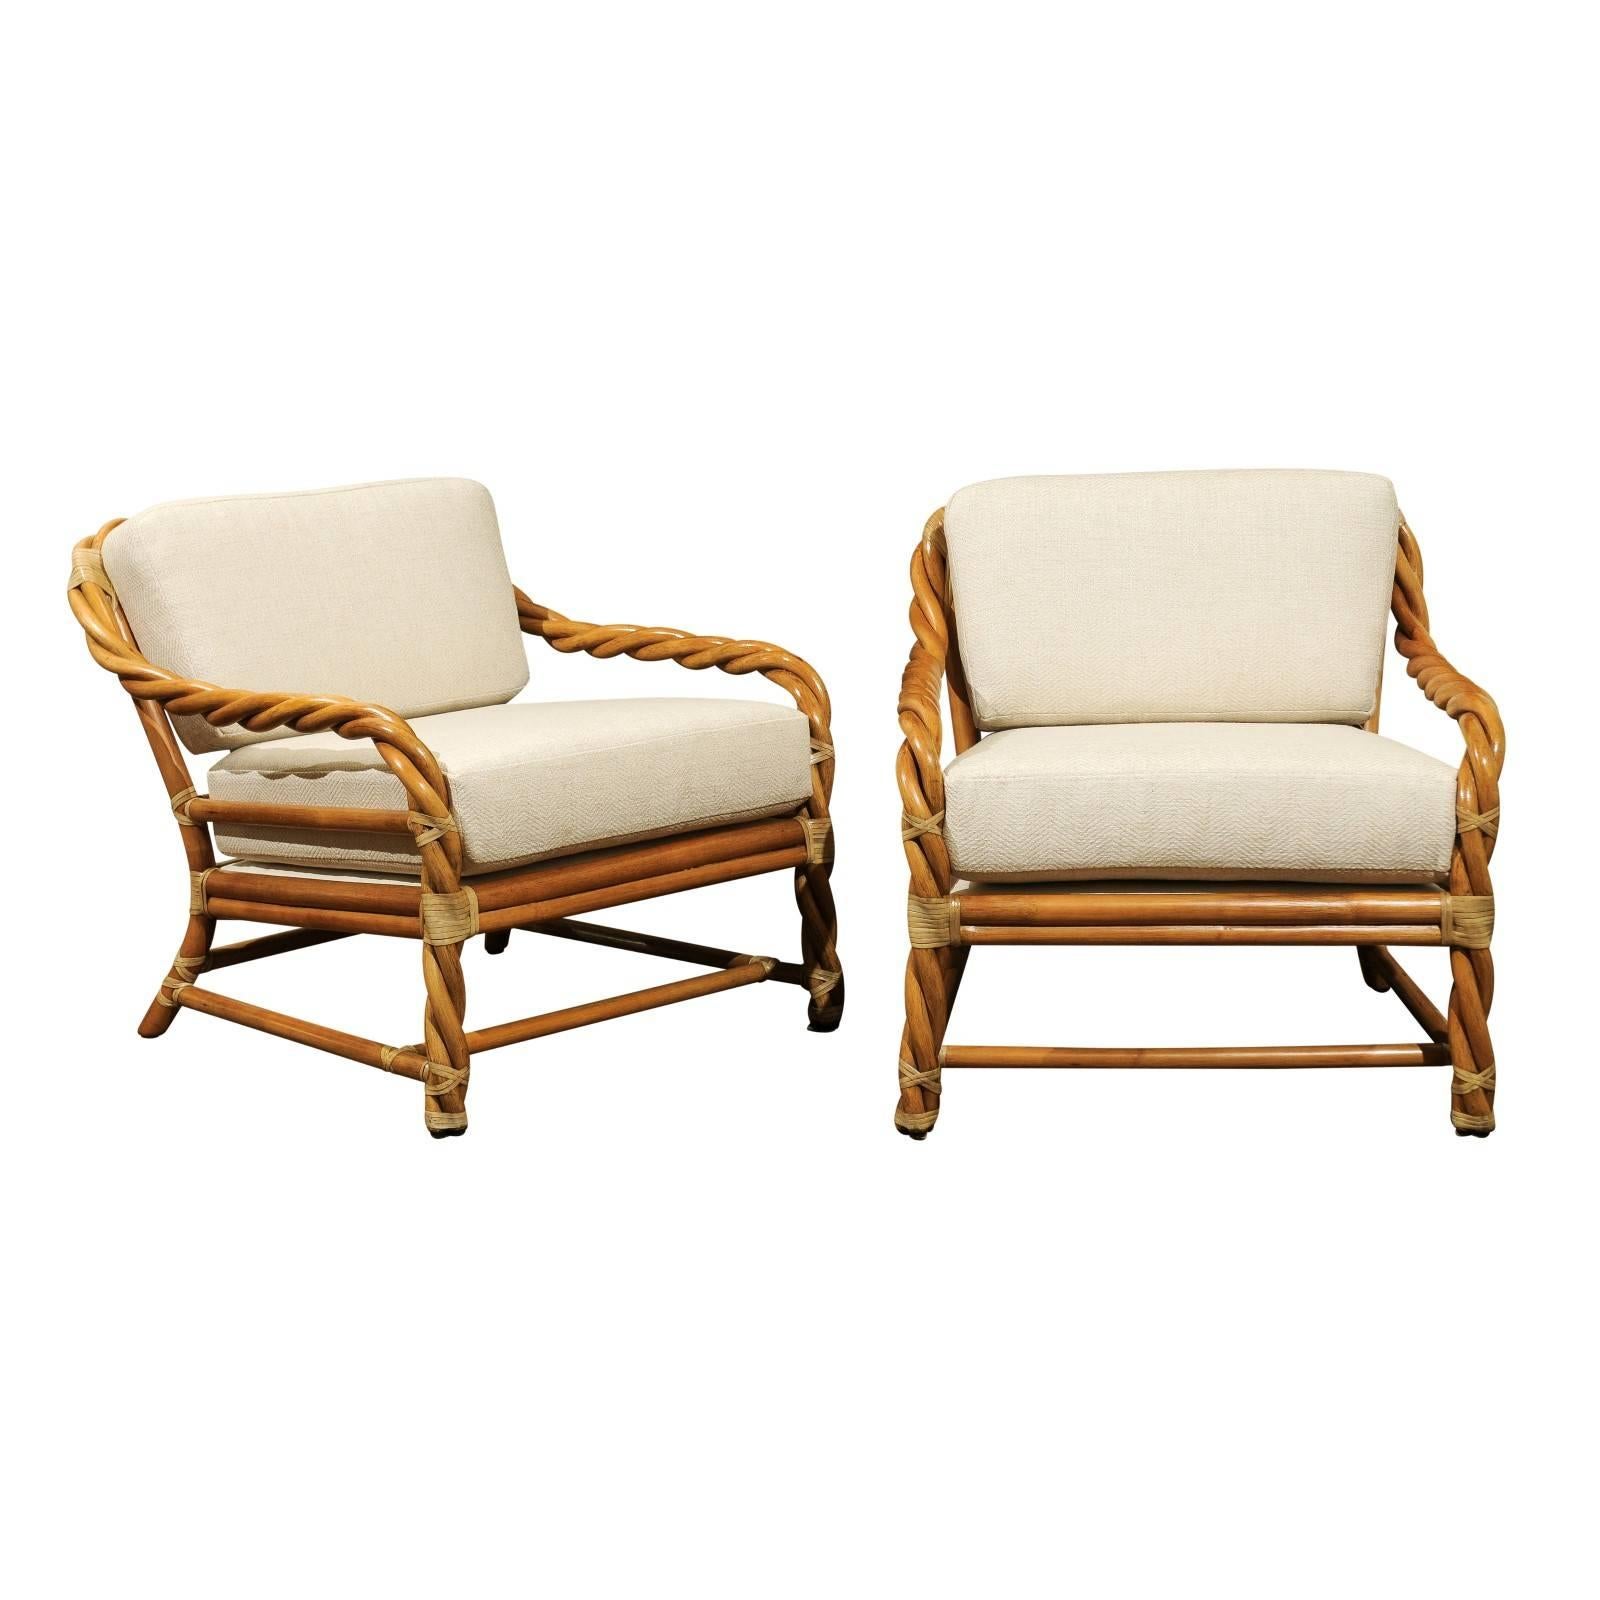 Coveted Pair of Restored Braided Rattan Loungers by McGuire, circa 1980